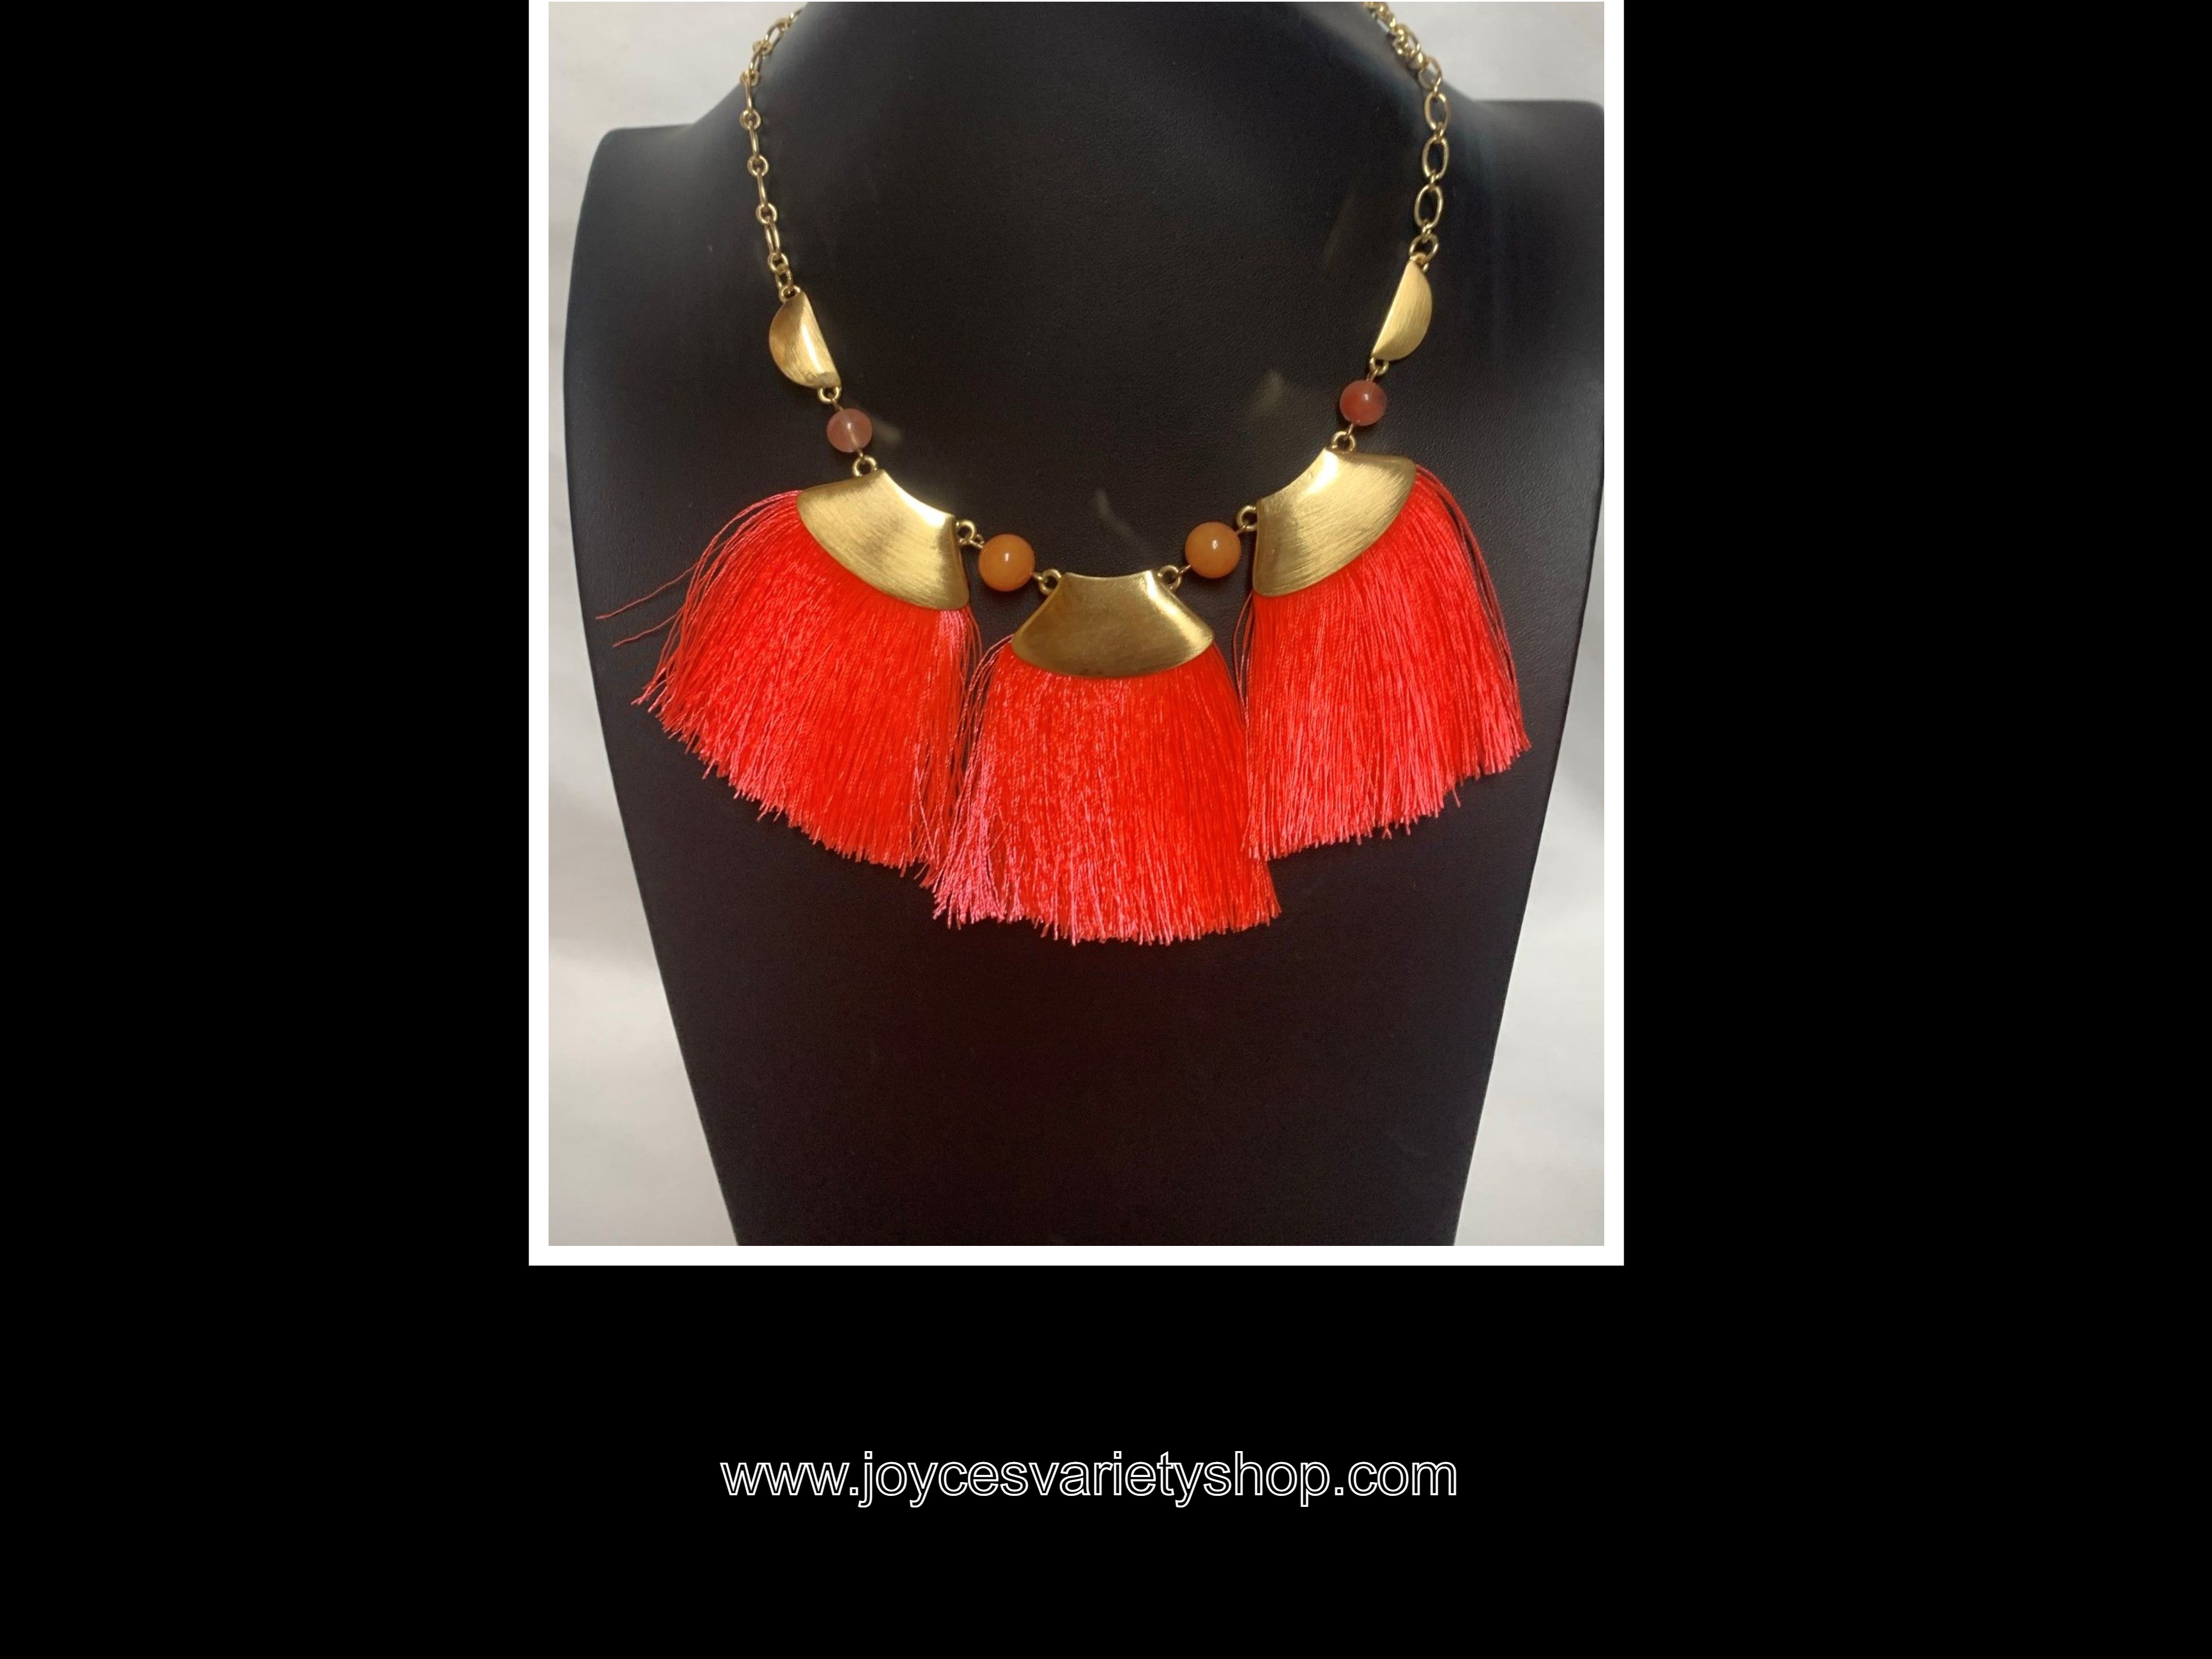 Fashion Necklace Bright Coral Tassels African Art Style Stony Jewelry 9" Chain